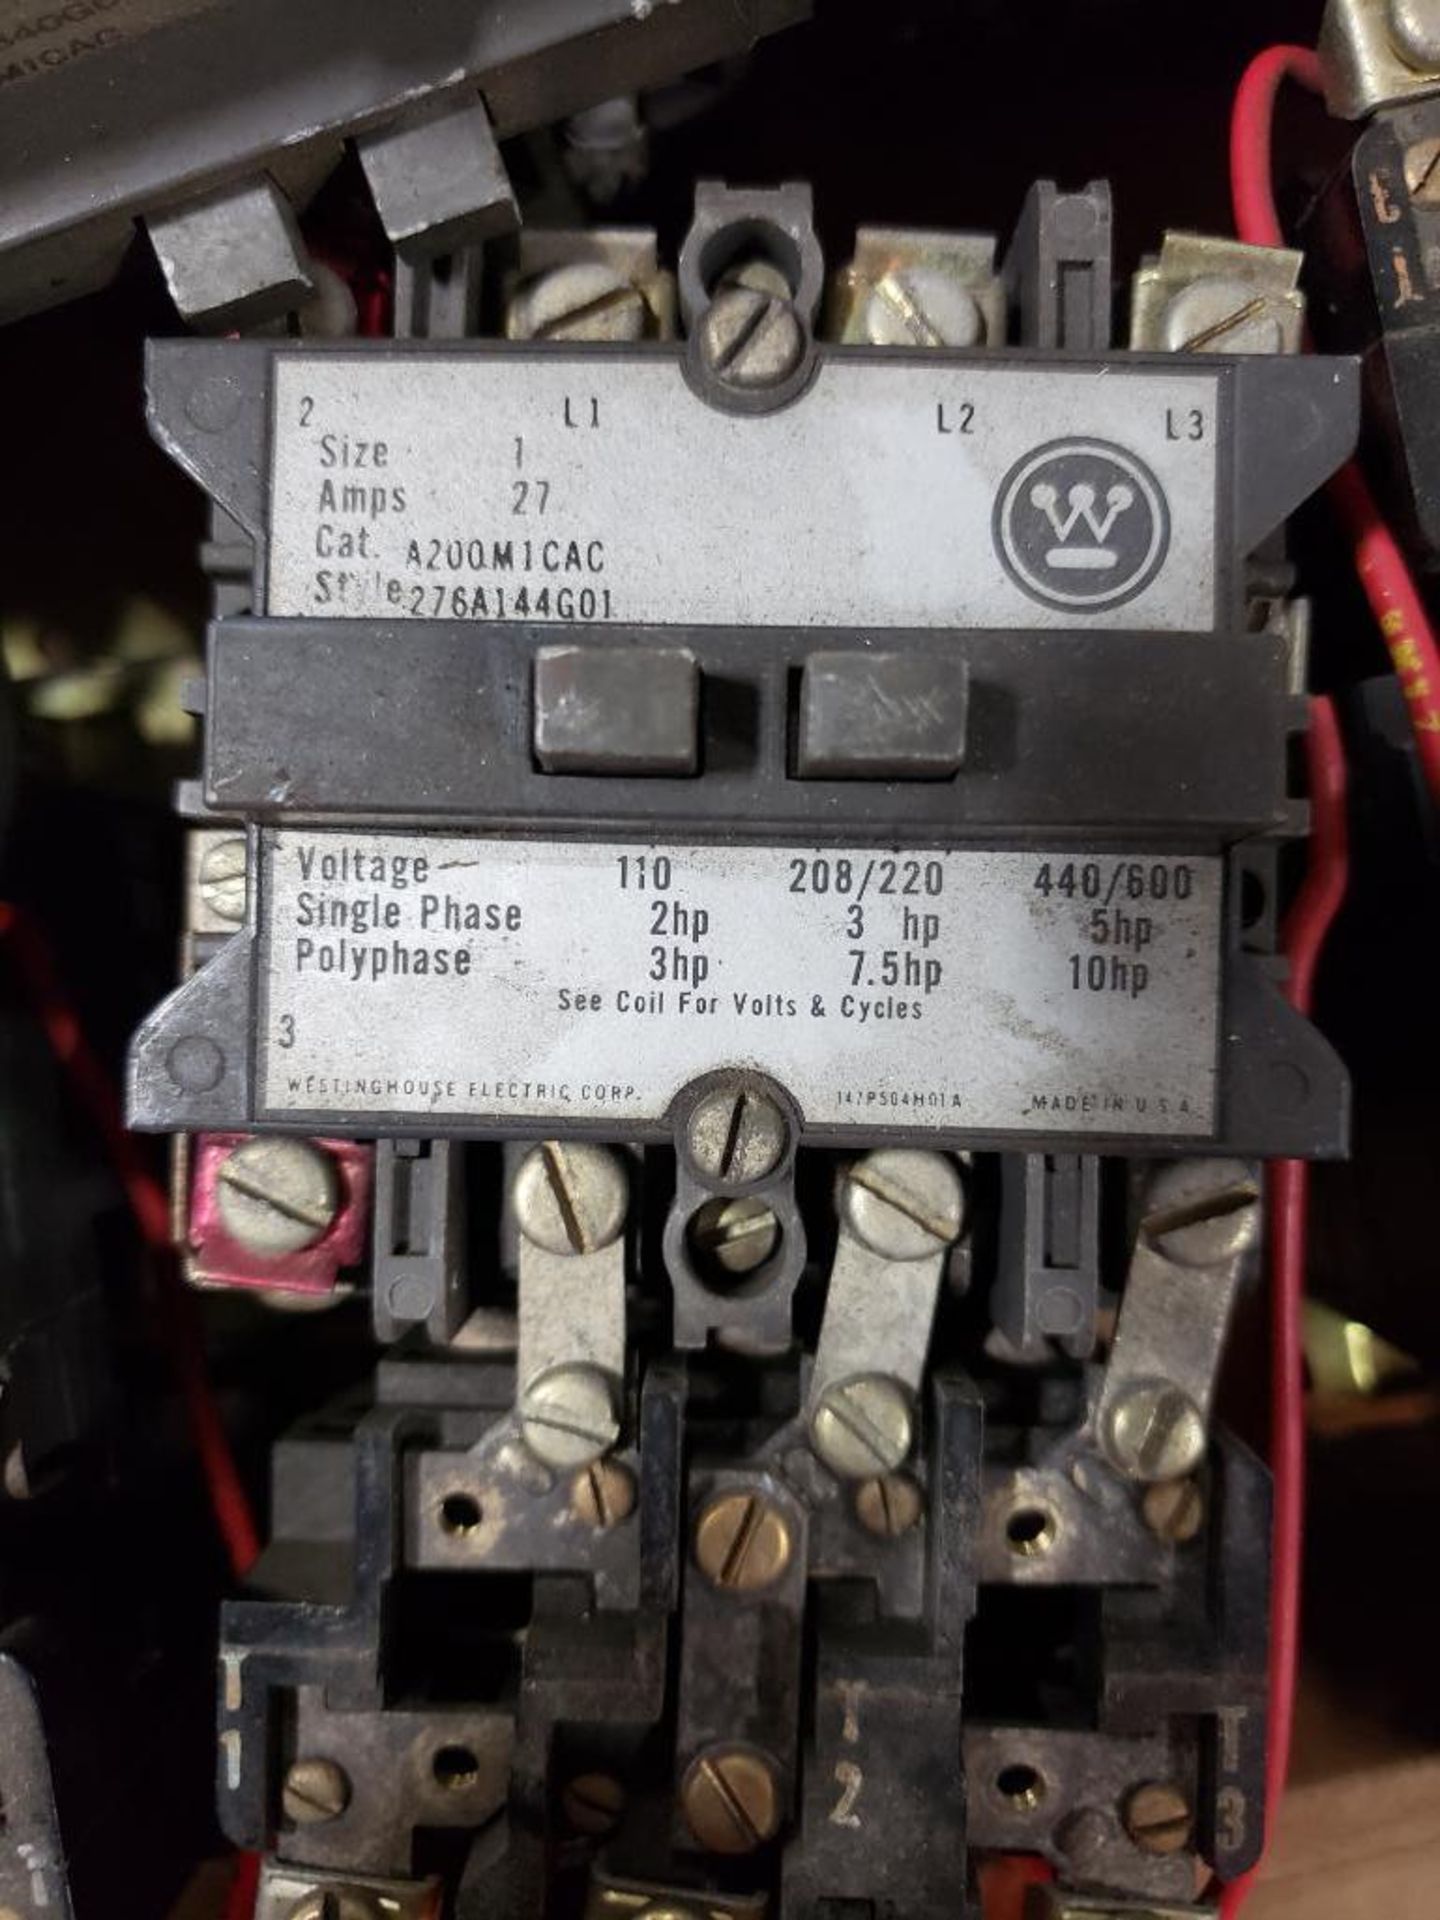 Qty 6 - Westinghouse starter contactors. A200M1CAC 27AMP. - Image 3 of 9